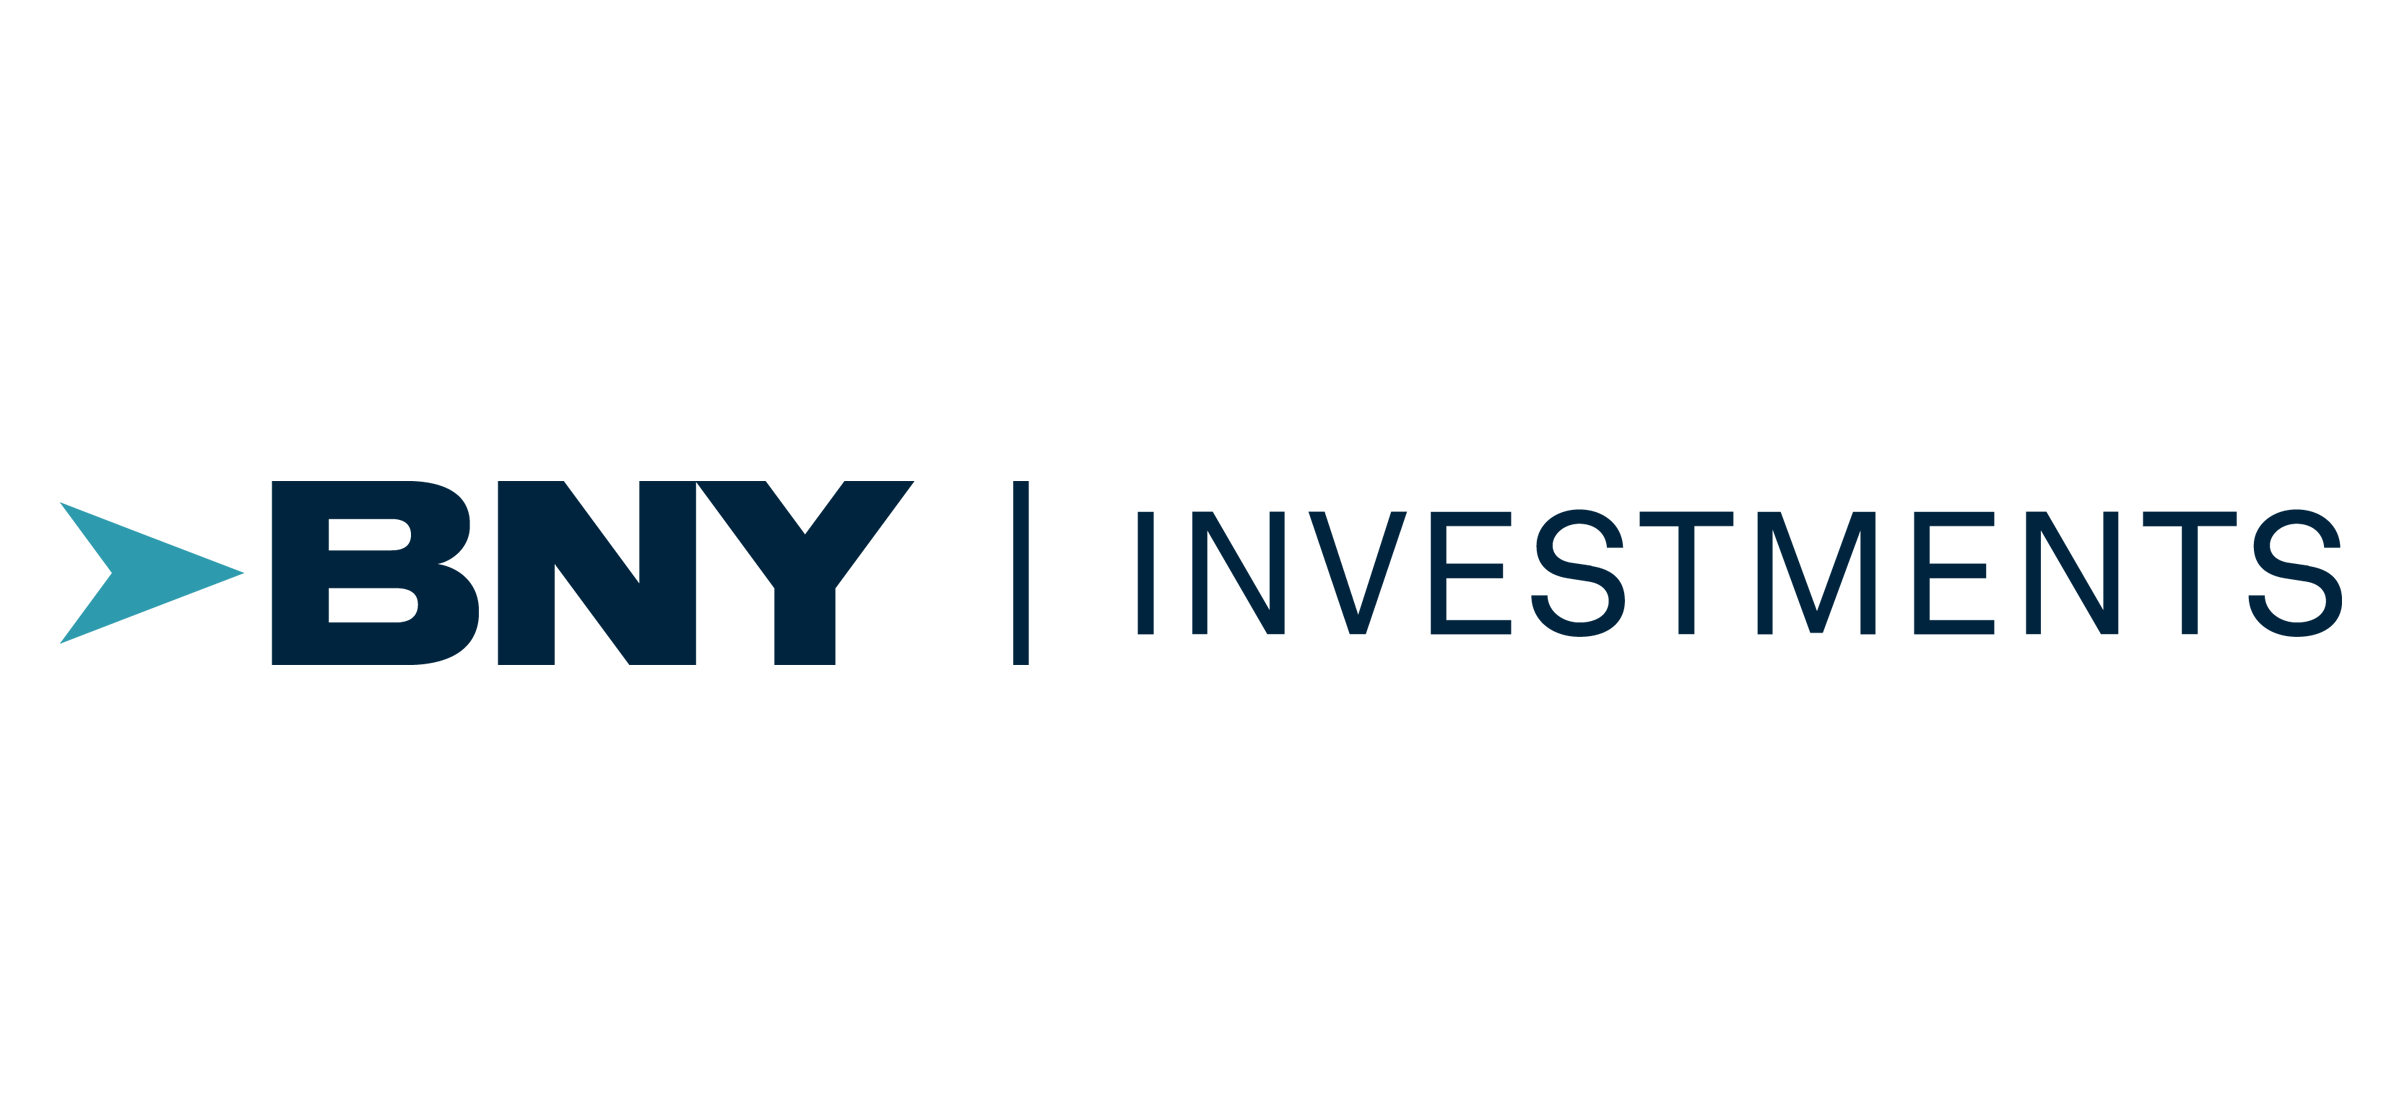 Welcome to BNY Mellon Investment Management | BNY Investments